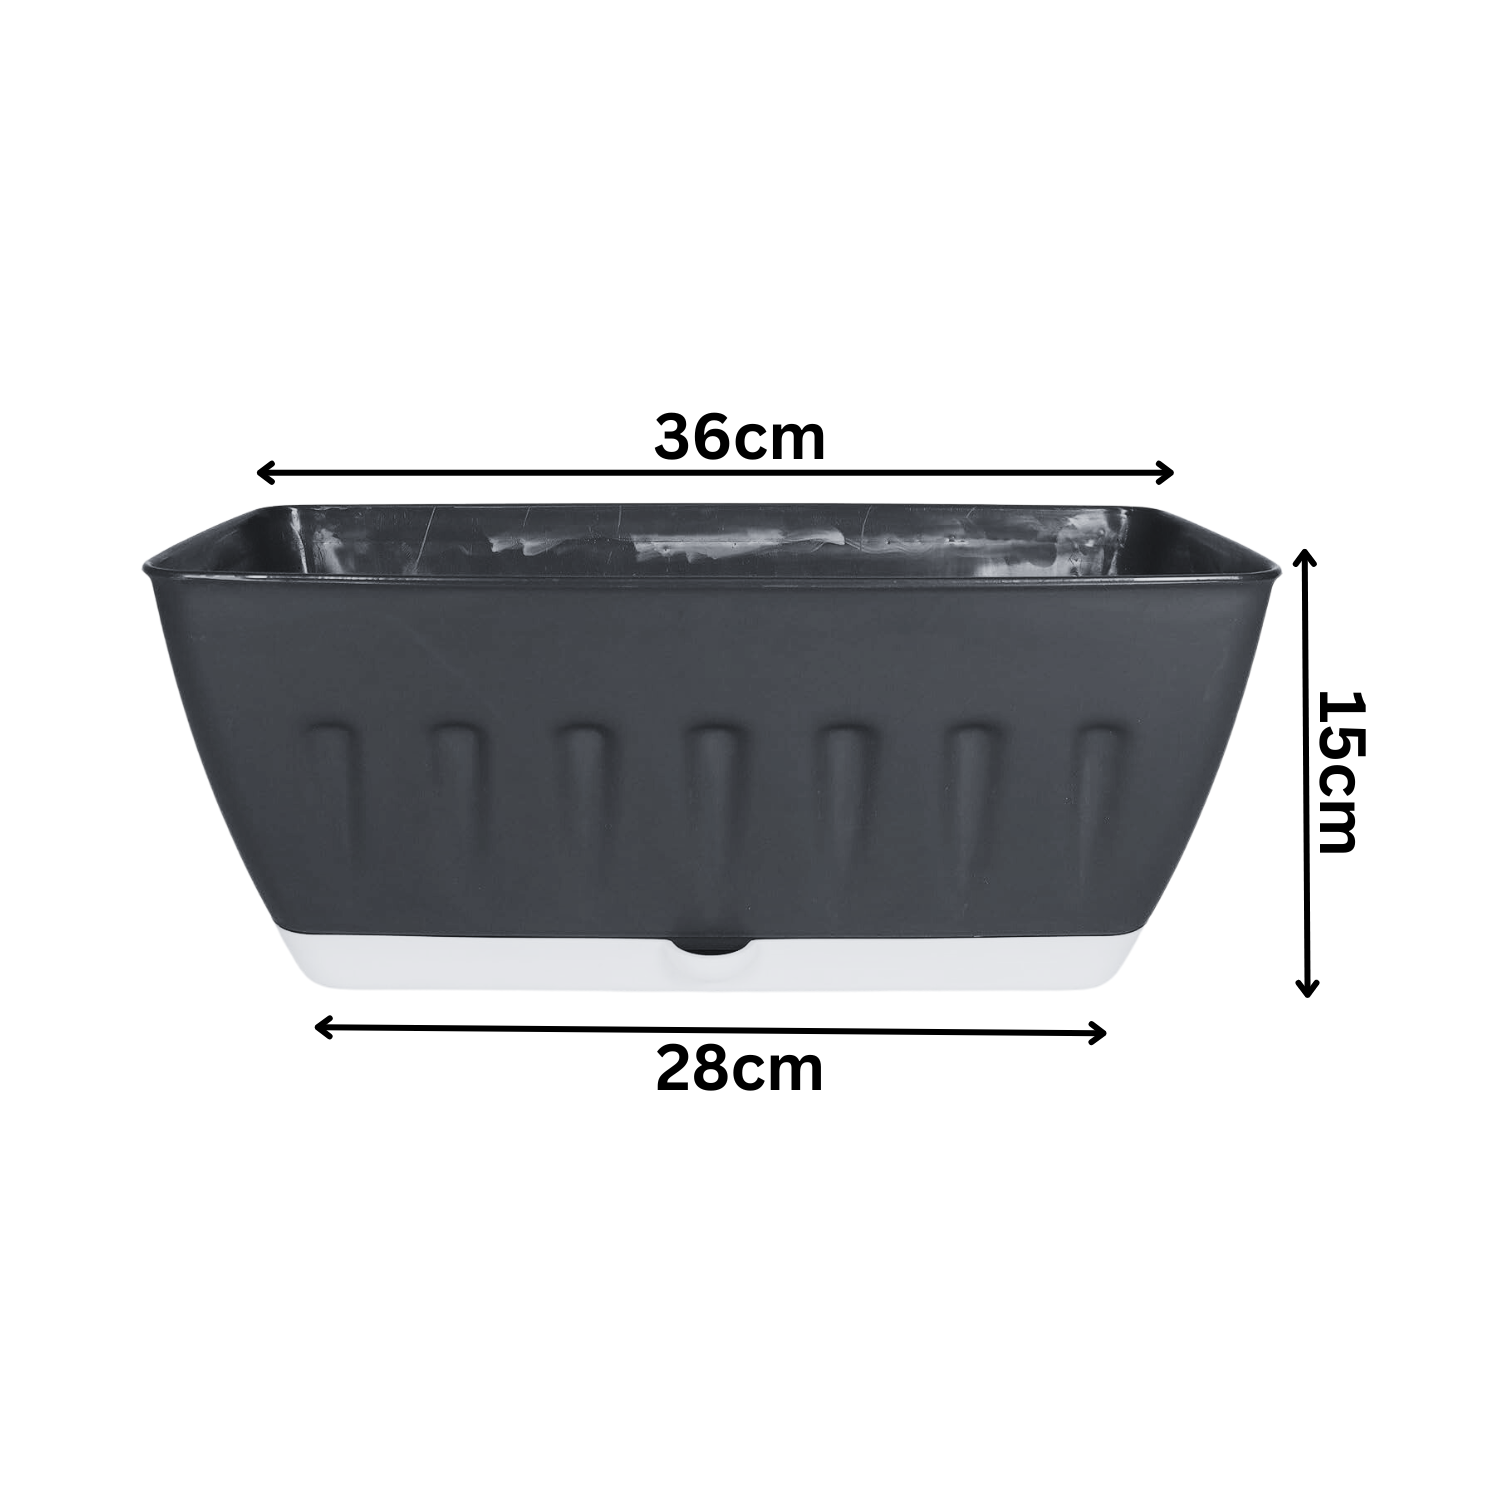 Khidki Rectangle 36CM Selfwatering Window Planter for Home Gardening | Lawns and Gardens | Flower Pots for Home Balcony Garden